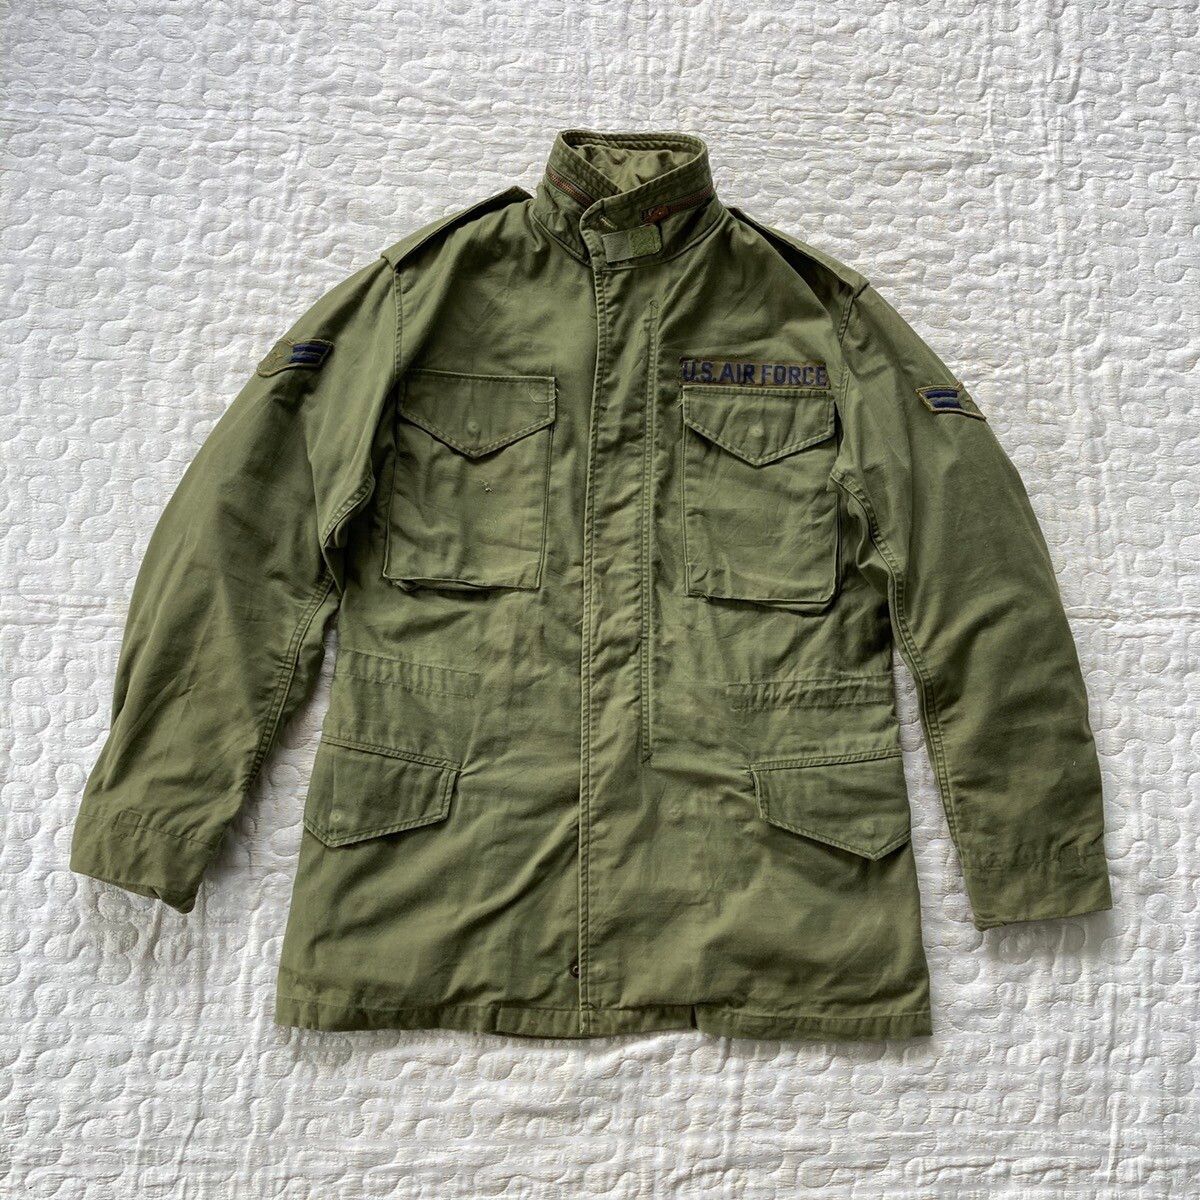 Military TRUE VINTAGE 1981 ISSUE US ARMY M65 FIELD JACKET | Grailed